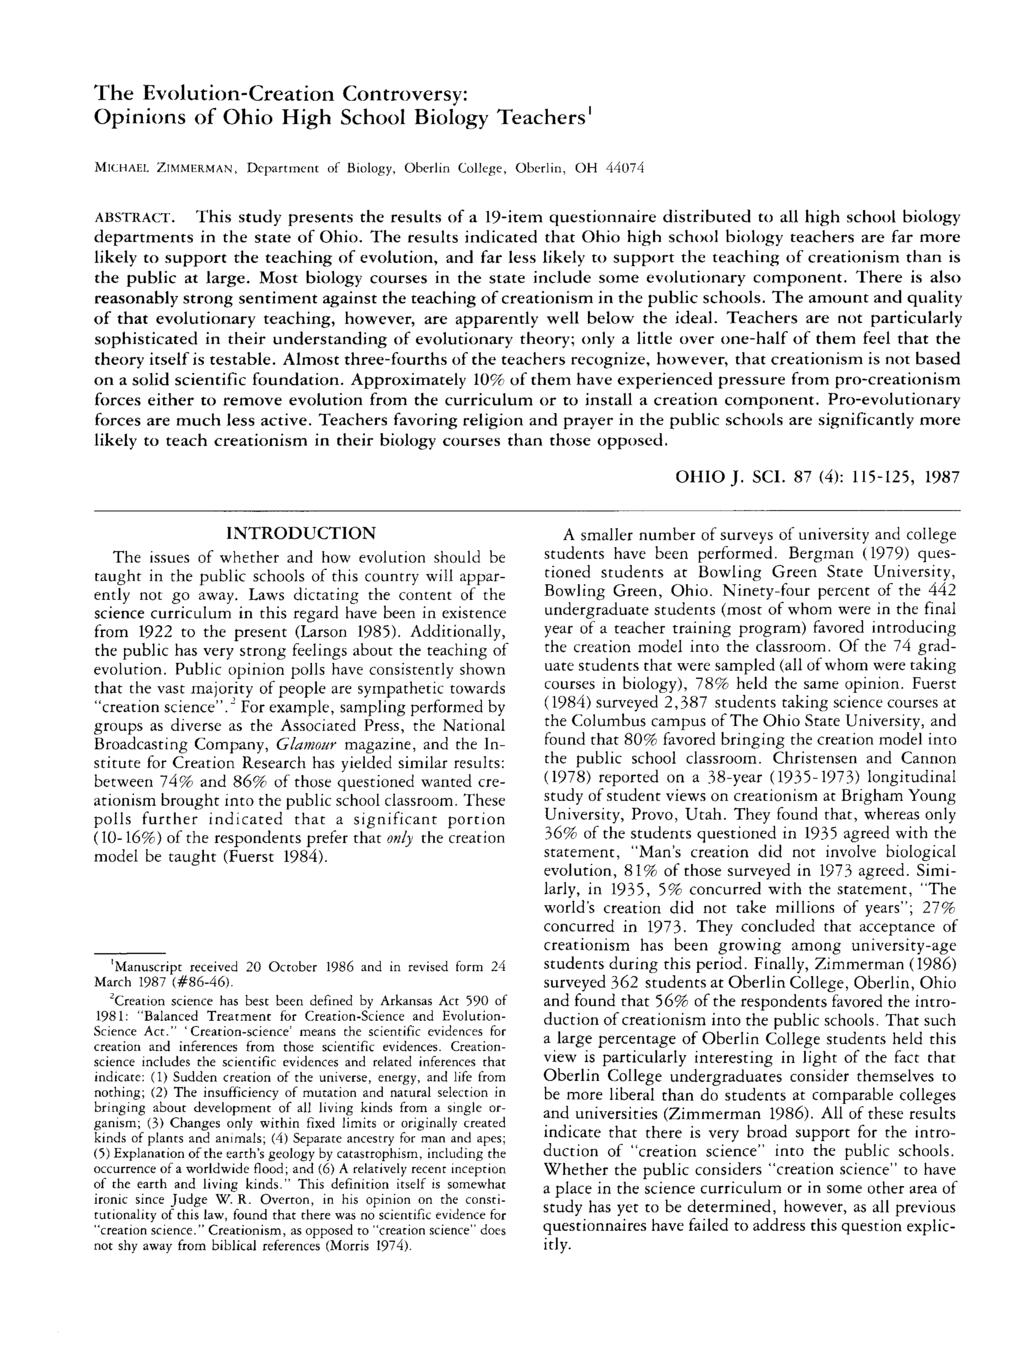 The Evolution-Creation Controversy: Opinions of Ohio High School Biology Teachers' MICHAEL ZIMMERMAN, Department of Biology, Oberlin College, Oberlin, OH 4474 ABSTRACT.